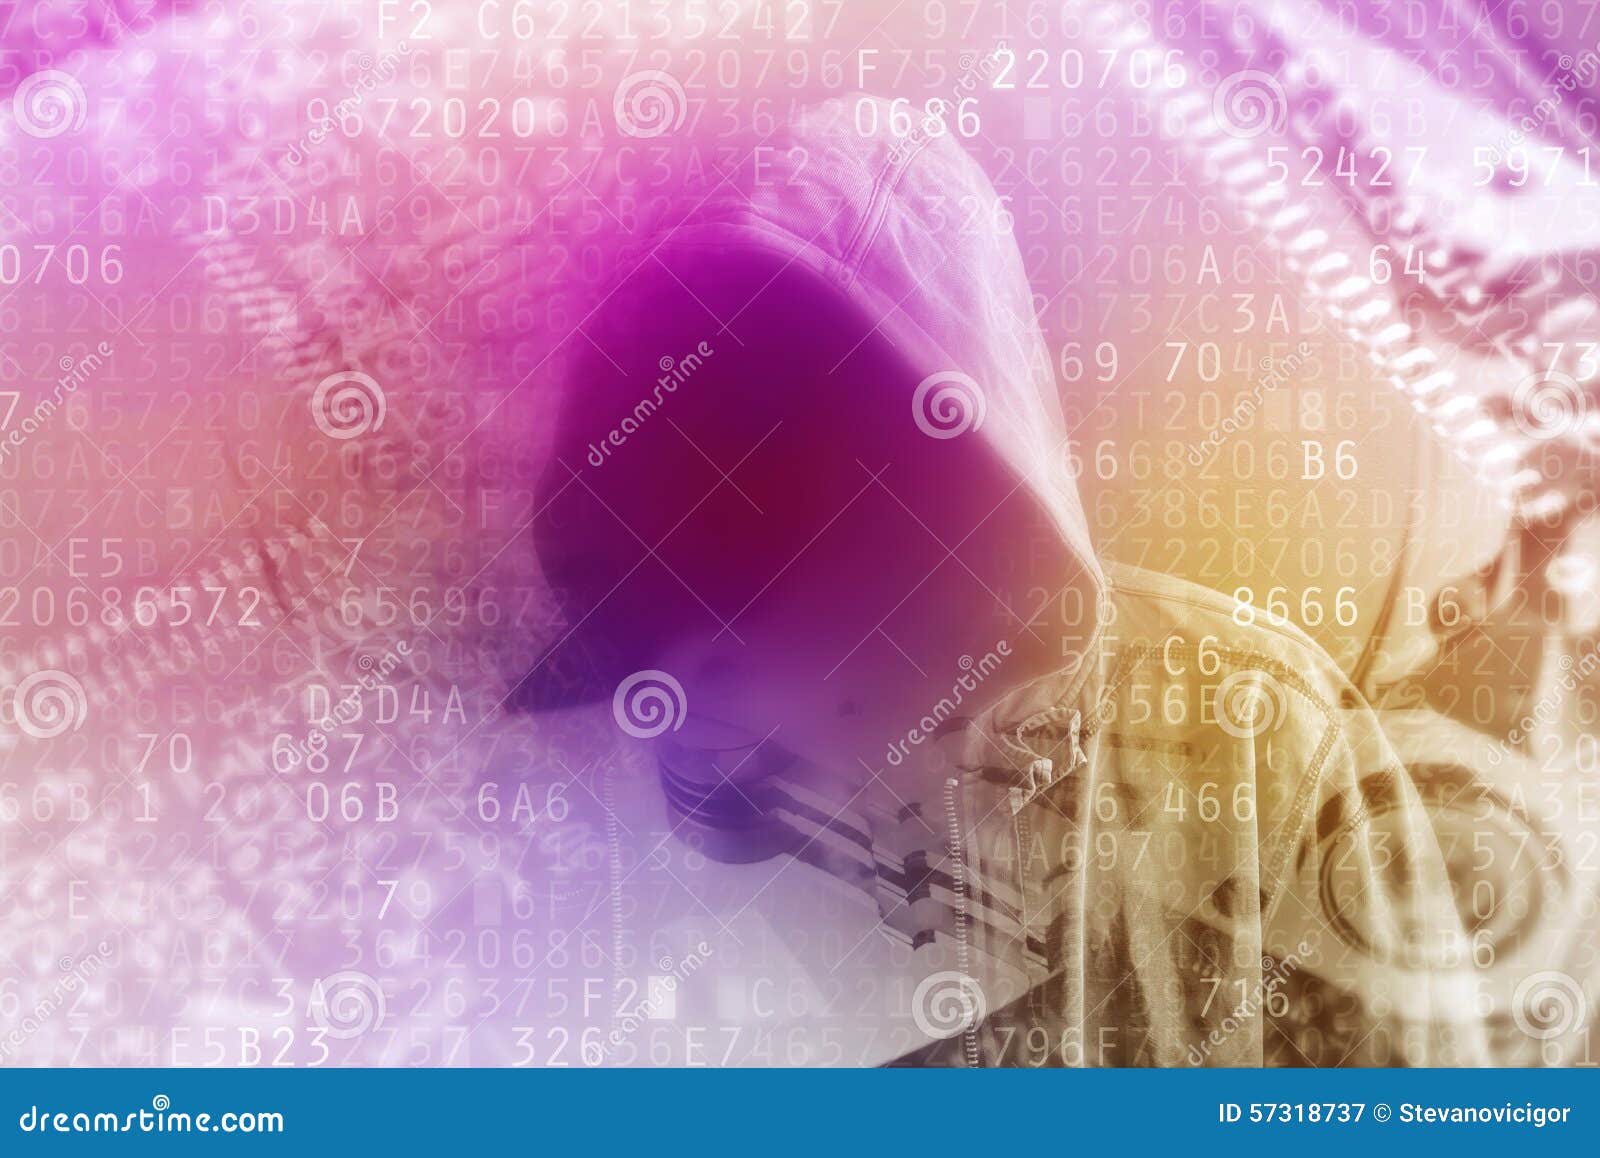 Cyber criminal double exposure. Cyber crime double exposure concept, faceless unknown hooded man with computer technology background